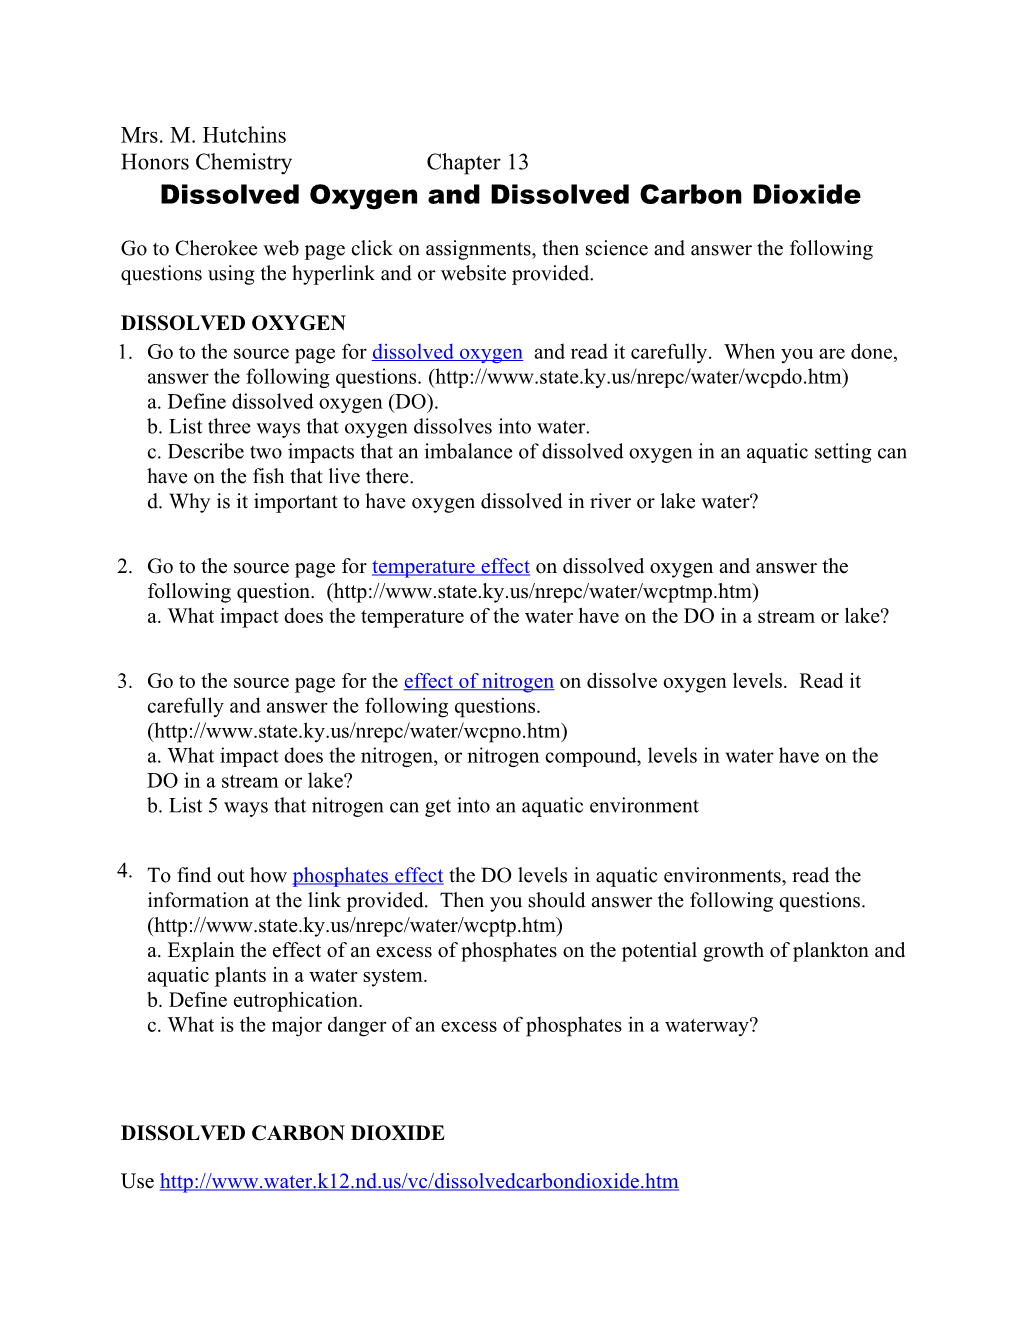 Dissolved Oxygen and Dissolved Carbon Dioxide